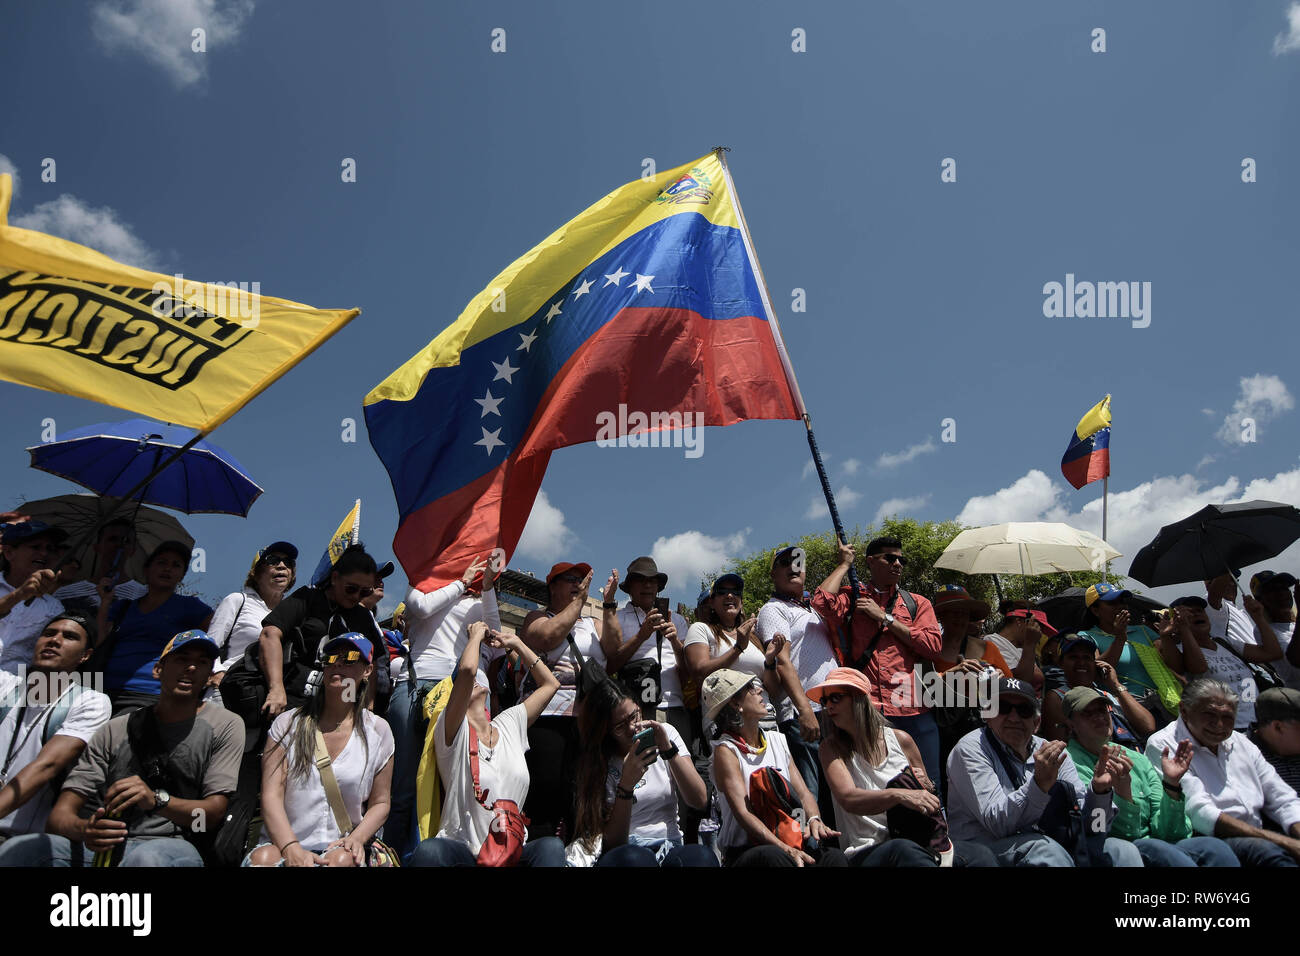 A man seen waving a huge Venezuelan flag during a rally in support of Juan Guaido. Juan Guaido, the Venezuelan opposition leader, where many nations have recognized as the legitimate interim president of Venezuela, greets his supporters during a rally against the government of President Nicolas Maduro in Caracas. Stock Photo